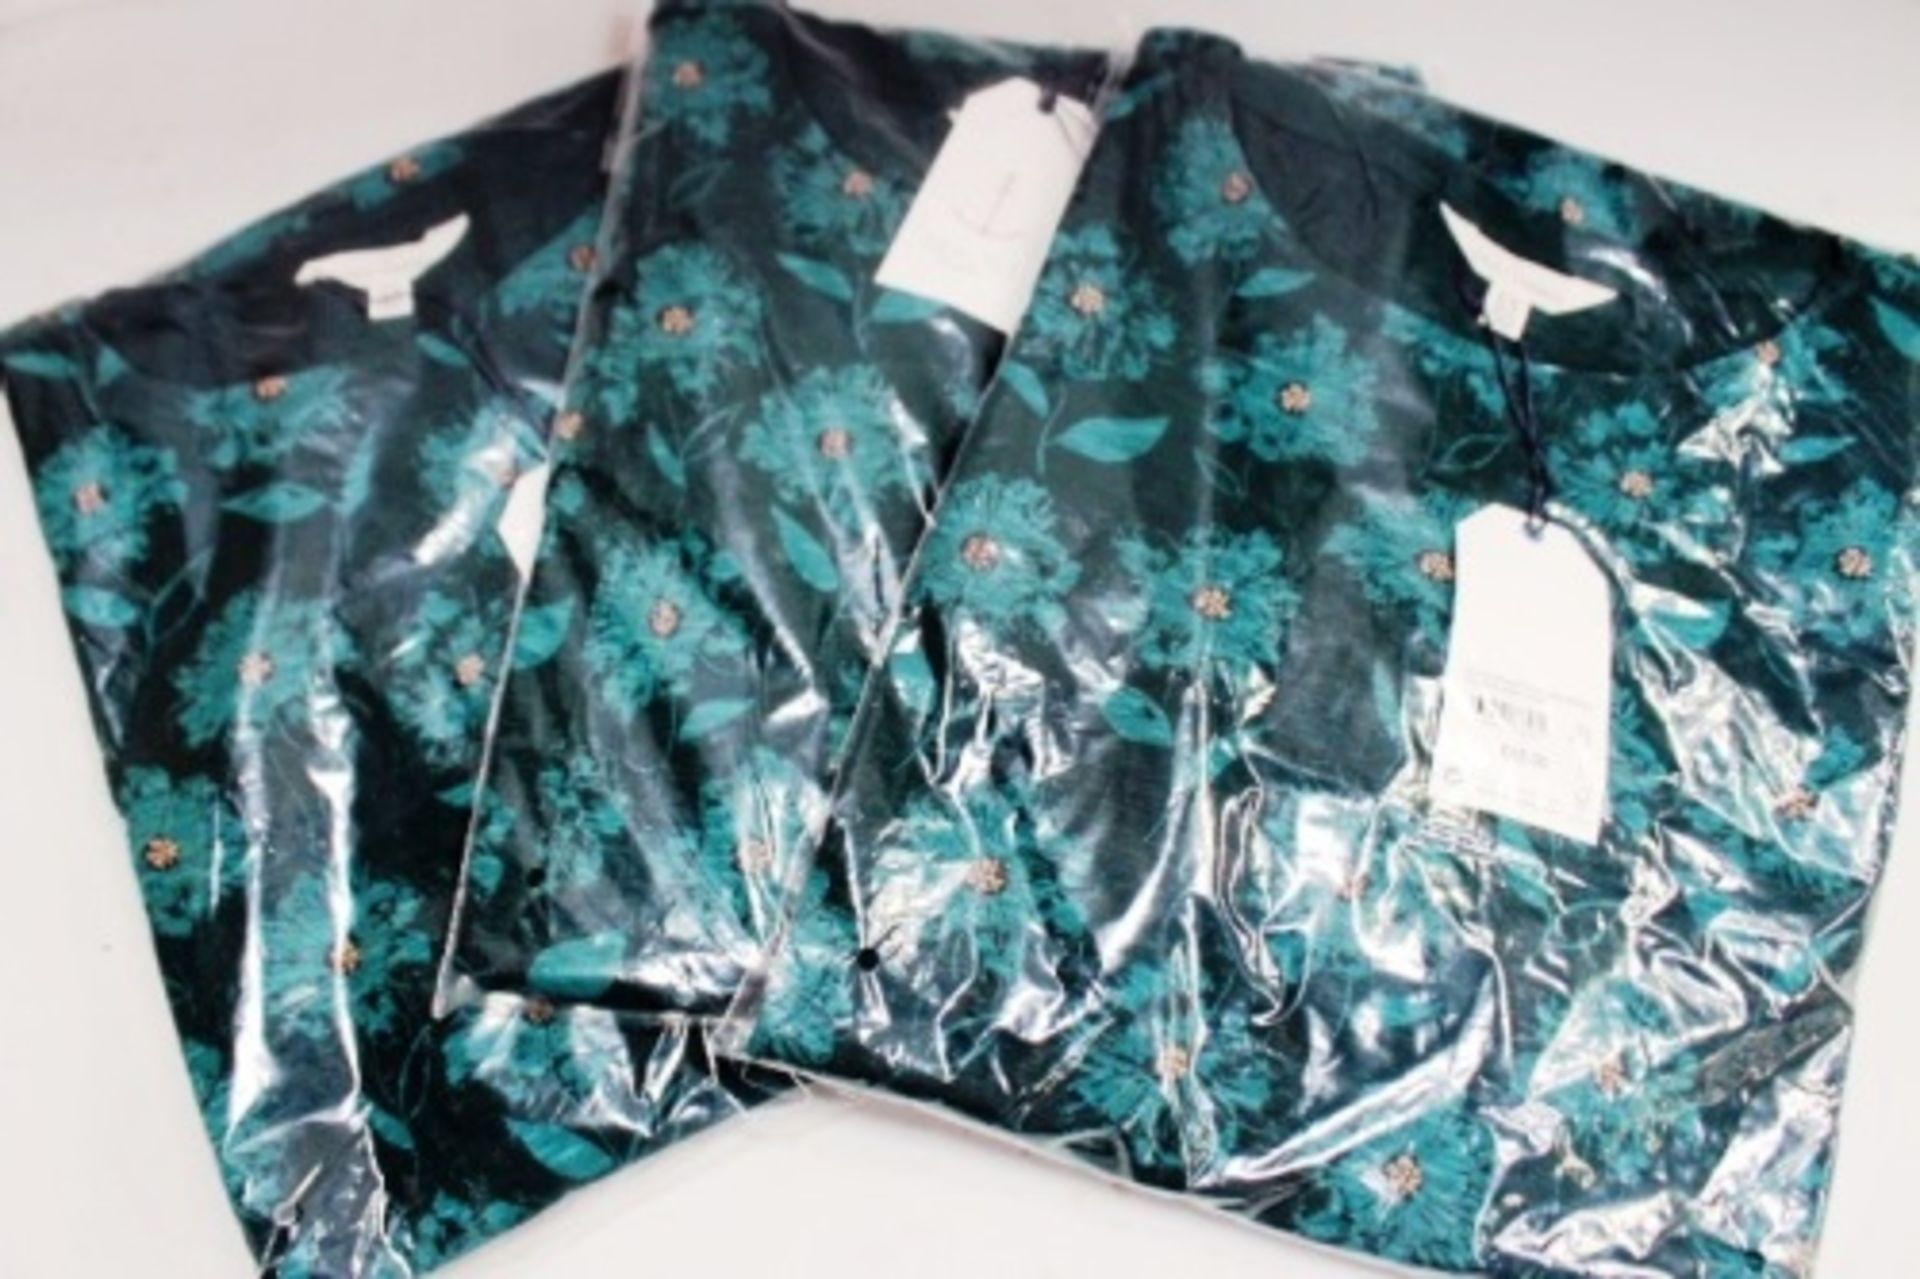 3 x Seasalt Painted Blooms, Thicket Shire foraging tunics, assorted sizes, RRP £55.00 each - New